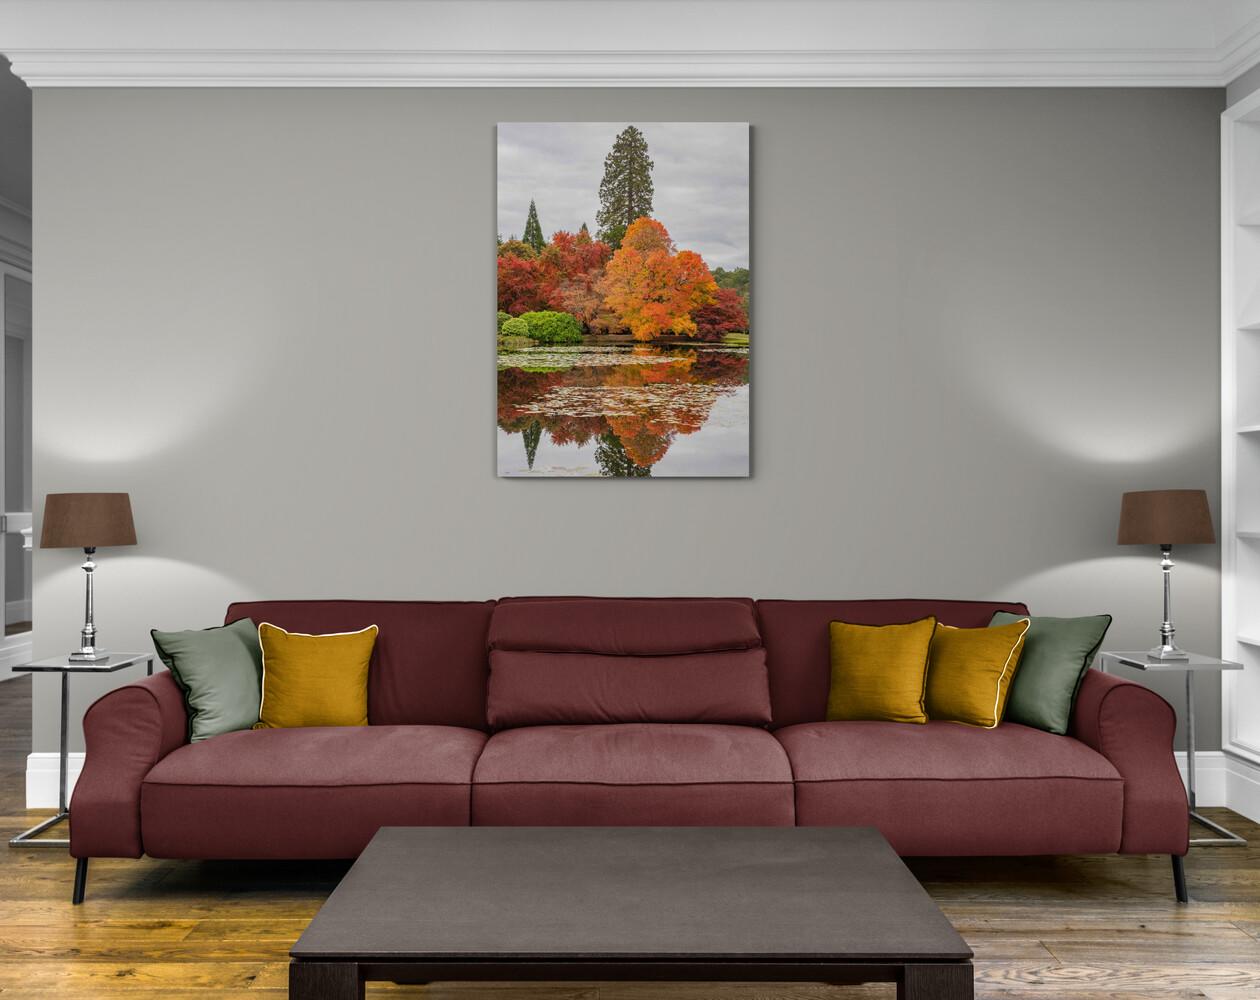 Getting the size of your print in proportion is important. This is a 120 x 85 canvas.